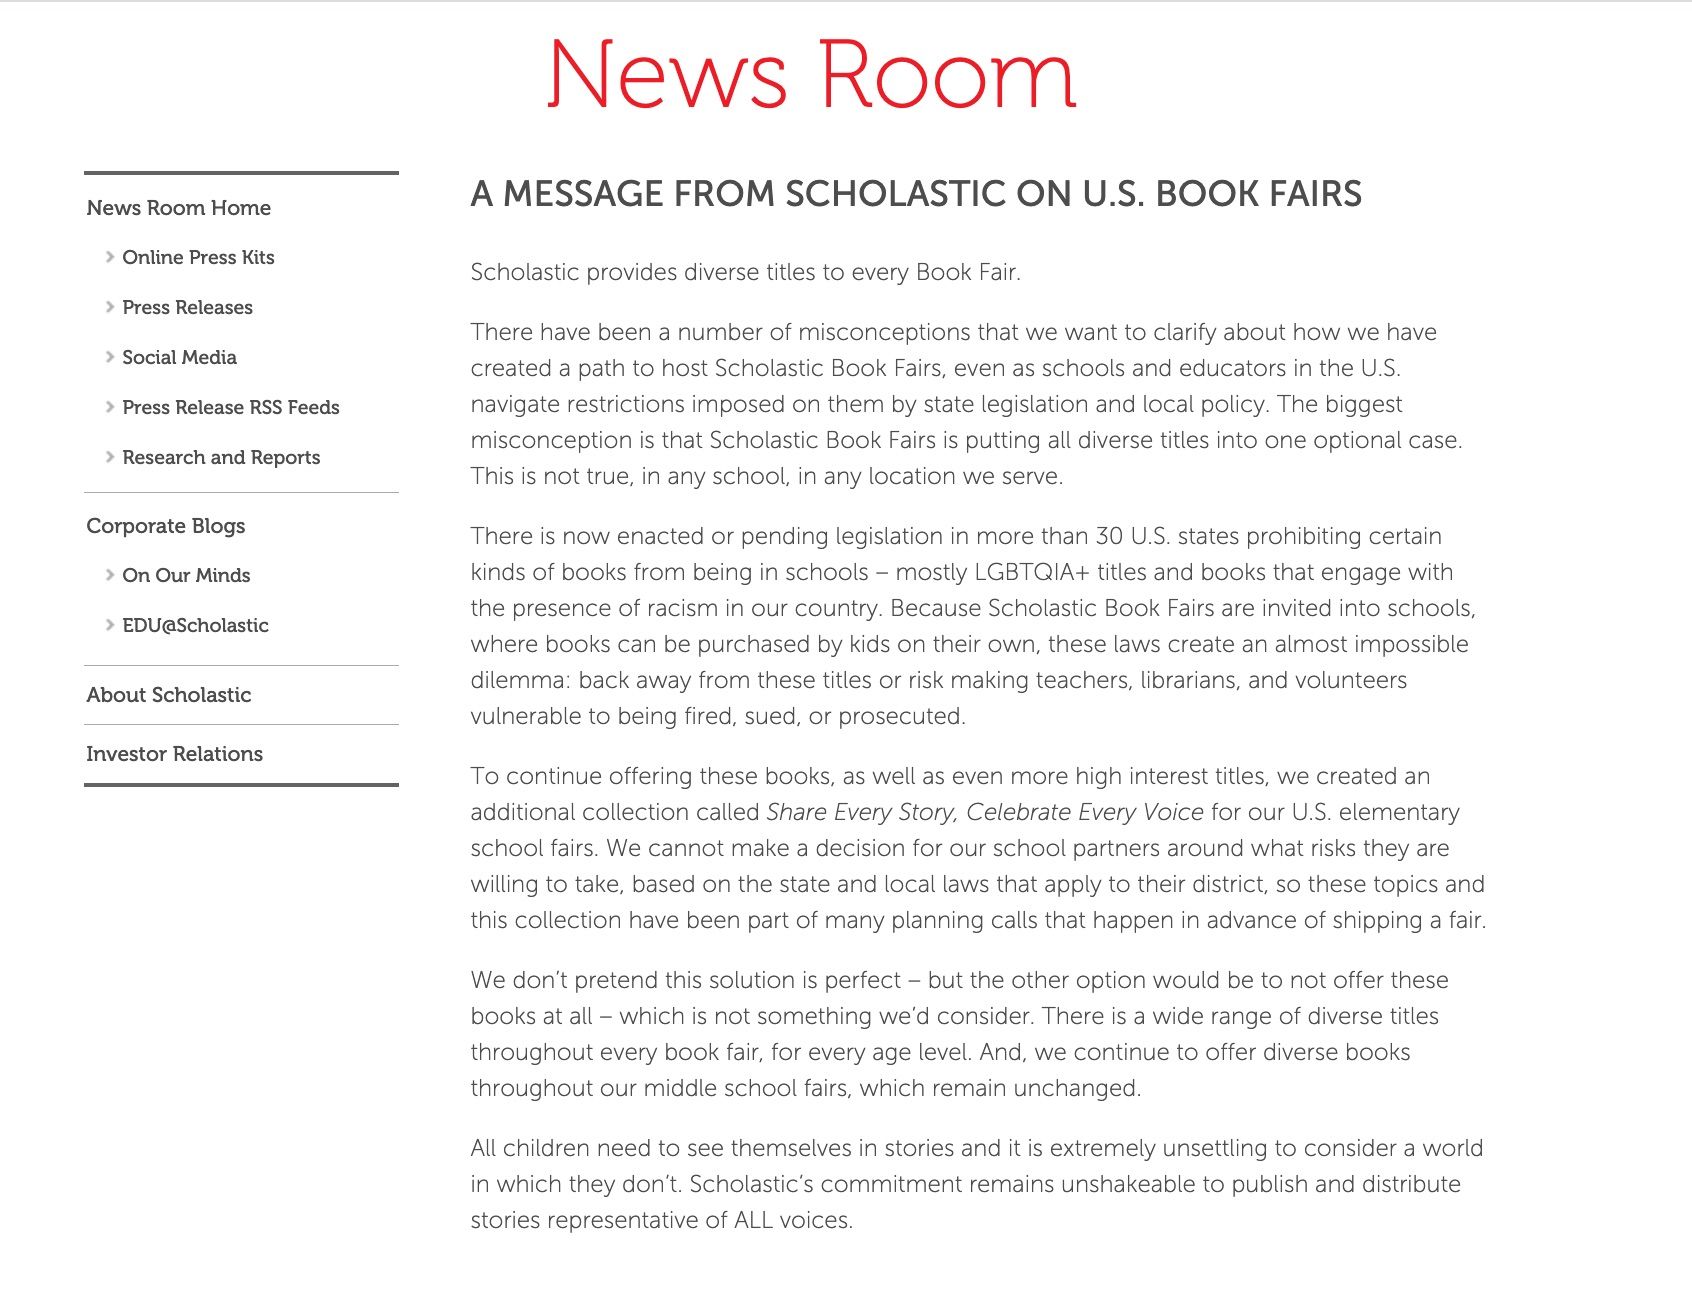 Text from Scholastic's statement on US book fairs.